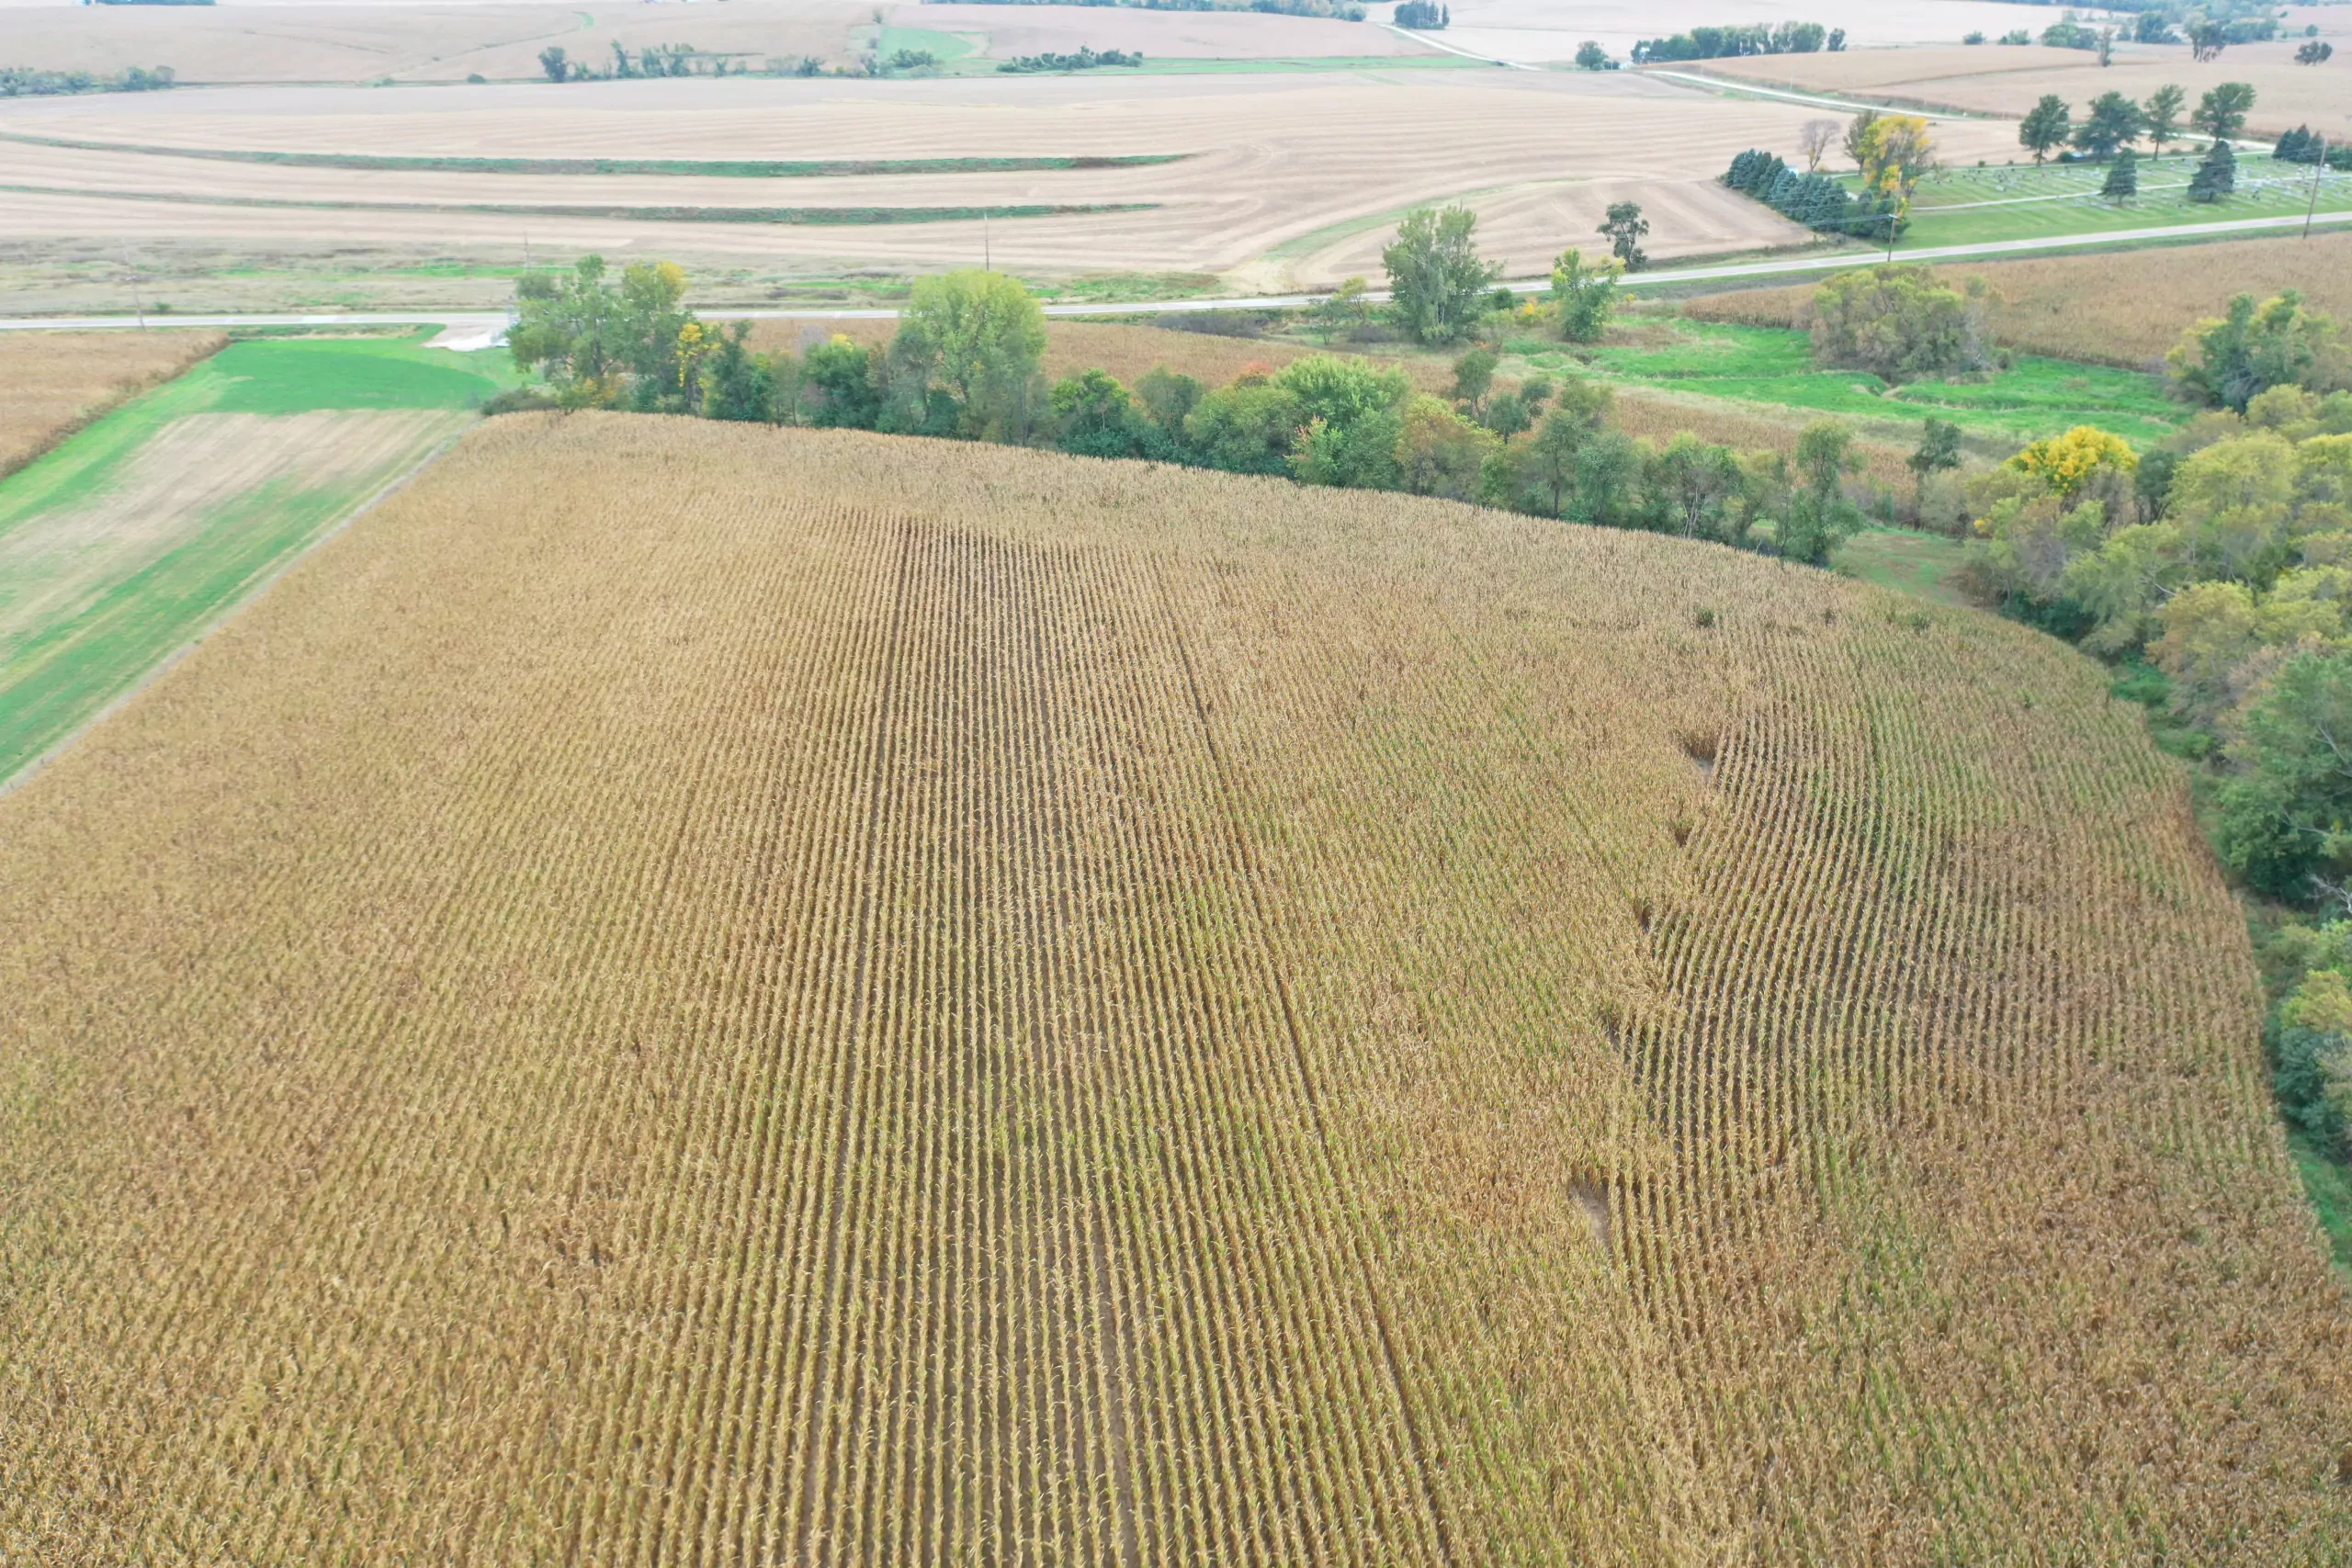 auctions-land-grundy-county-iowa-71-acres-listing-number-15798-DJI_0547-2.webp